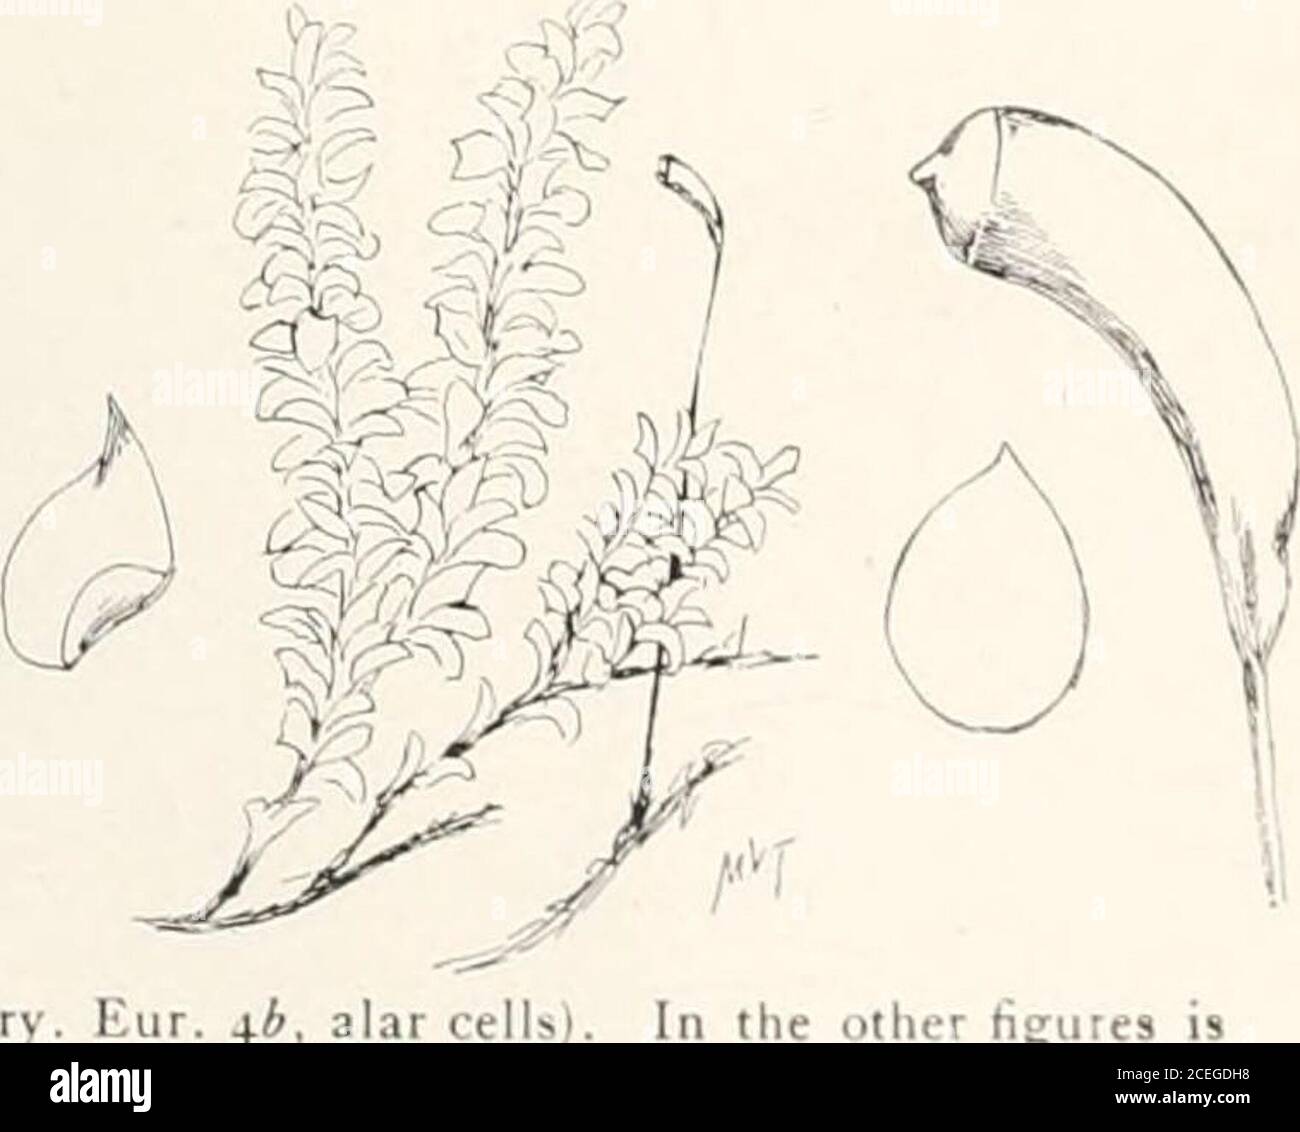 . Mosses with hand-lens and microscope : a non-technical hand-book of the more common mosses of the northeastern United States. motleFigure 180. Hygroliypnum ditatatum (Figs. 1-5 from Bry. Eur. +4, alar cells)represented a plant X3, and leaves and capsule Xio.. ^46 MOSSES WITH HAND-LEXS AND MICROSCOPE hexagonal, frequently colored; spores in summer. Common in mountain brookson stones. This is the Hypniim molle of the Bryologia Europea and many otherauthors. The true Hypnum molle Dicks, probably does not occur in our rangealthough it is found in the western mountains. Its leaves are narrower pr Stock Photo